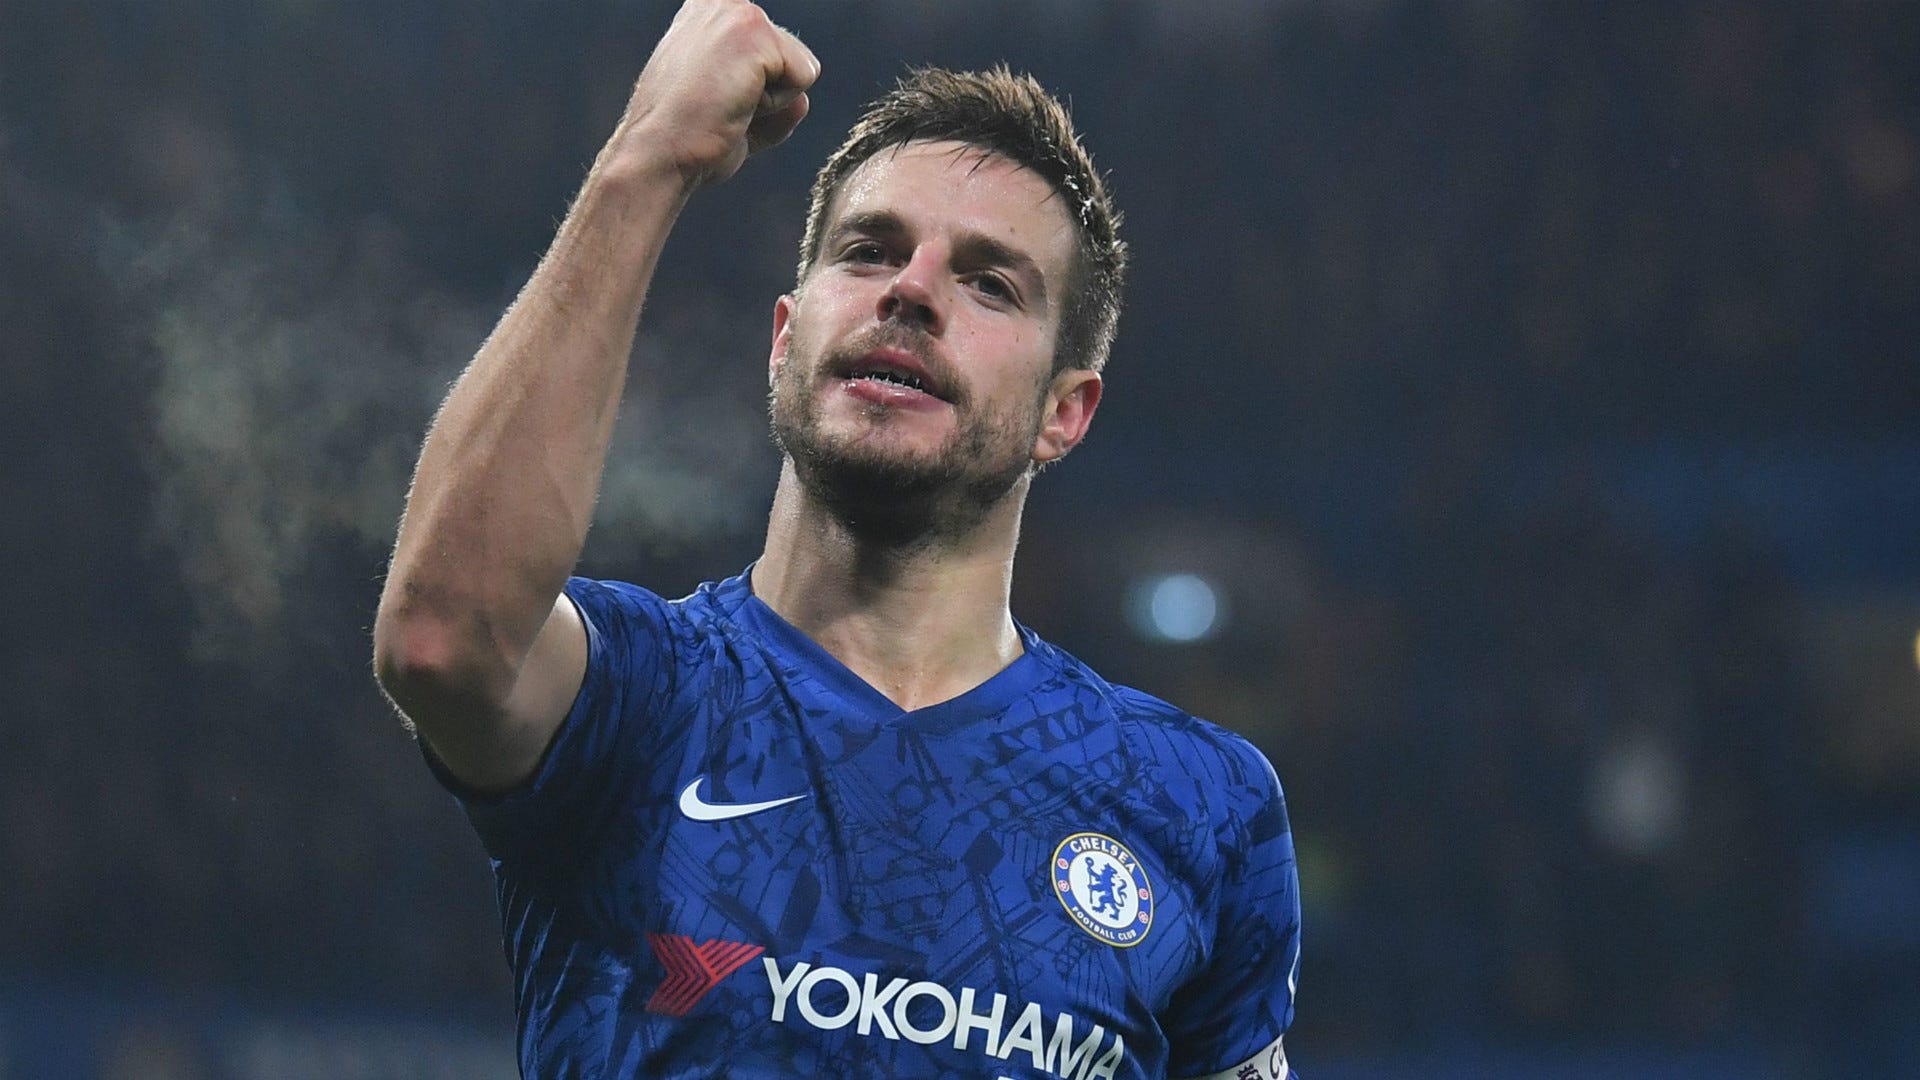 Azpilicueta: No one knew who I was when Chelsea signed me but I never considered quitting | Goal.com